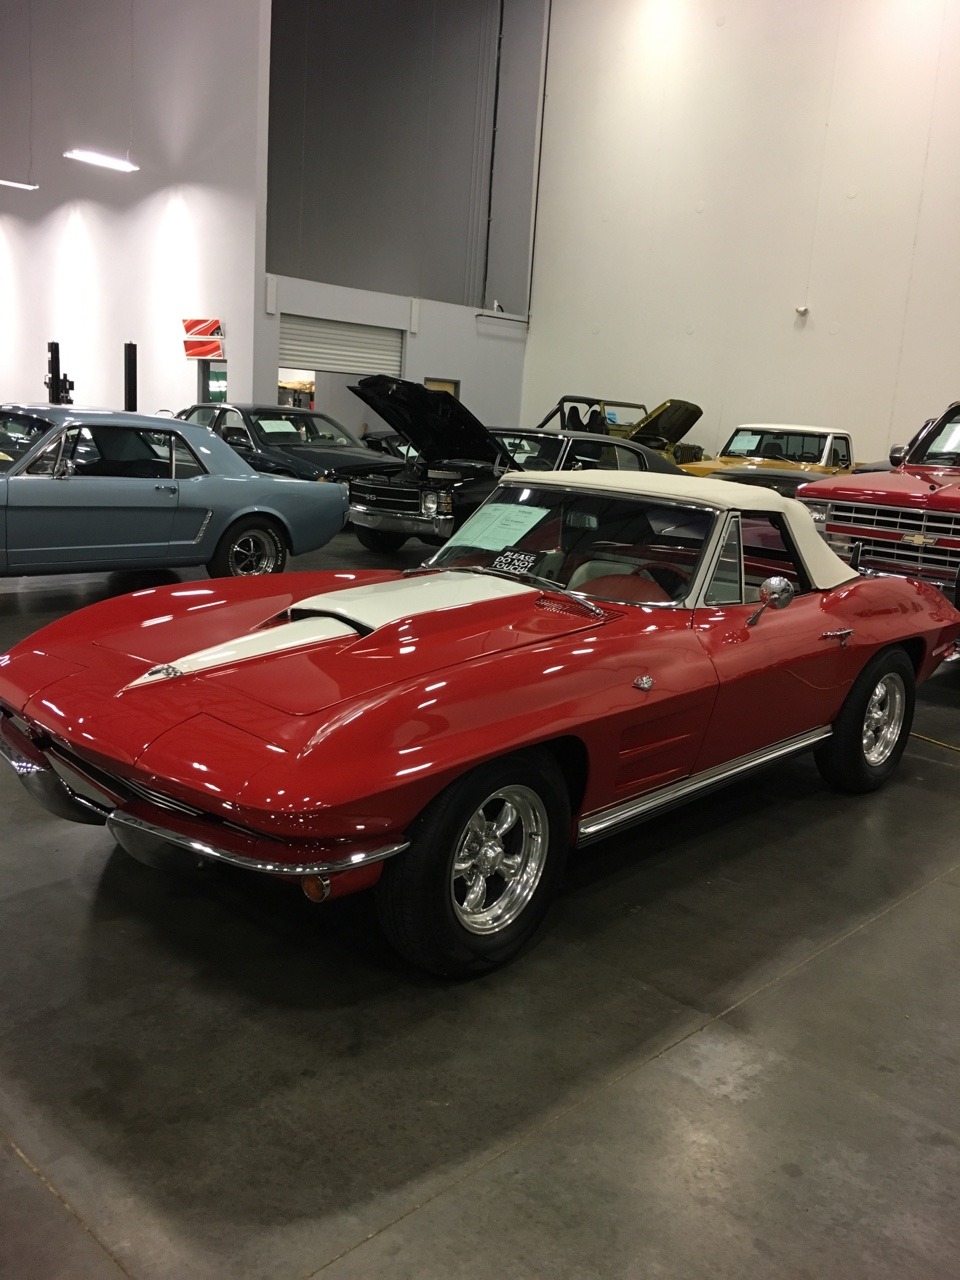 1963to1974:  1964 ragtop C2 Corvette with a 327 / 320 hp under the hood. I’m sure